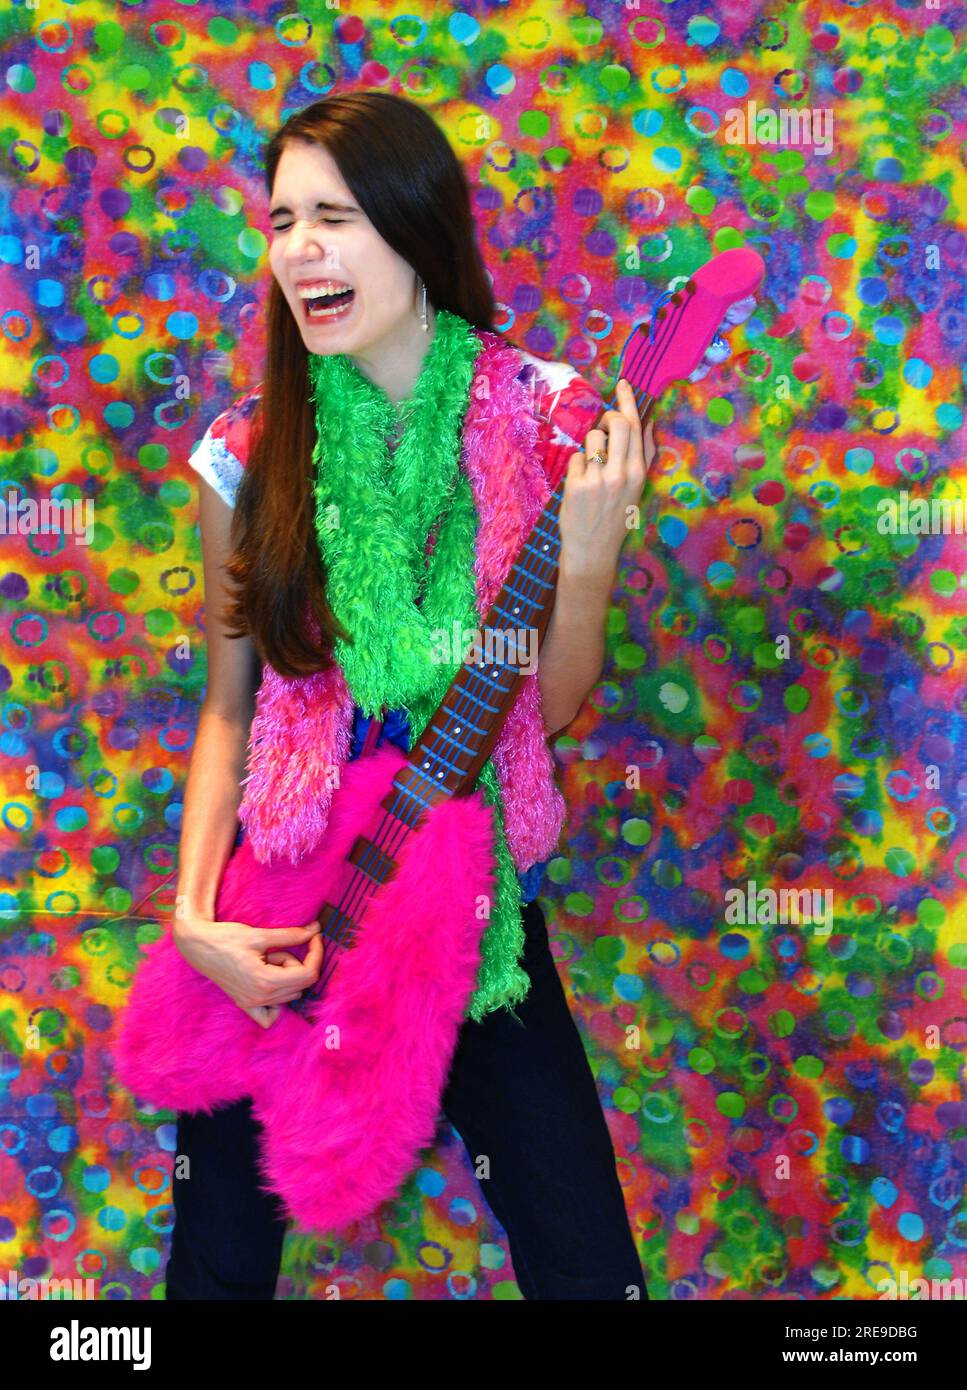 Laughing hillariously, female teen pretends to strum on the stuffed, fuzzy, base guitar.  A tye-dye background adds vibrant color and fun. Stock Photo